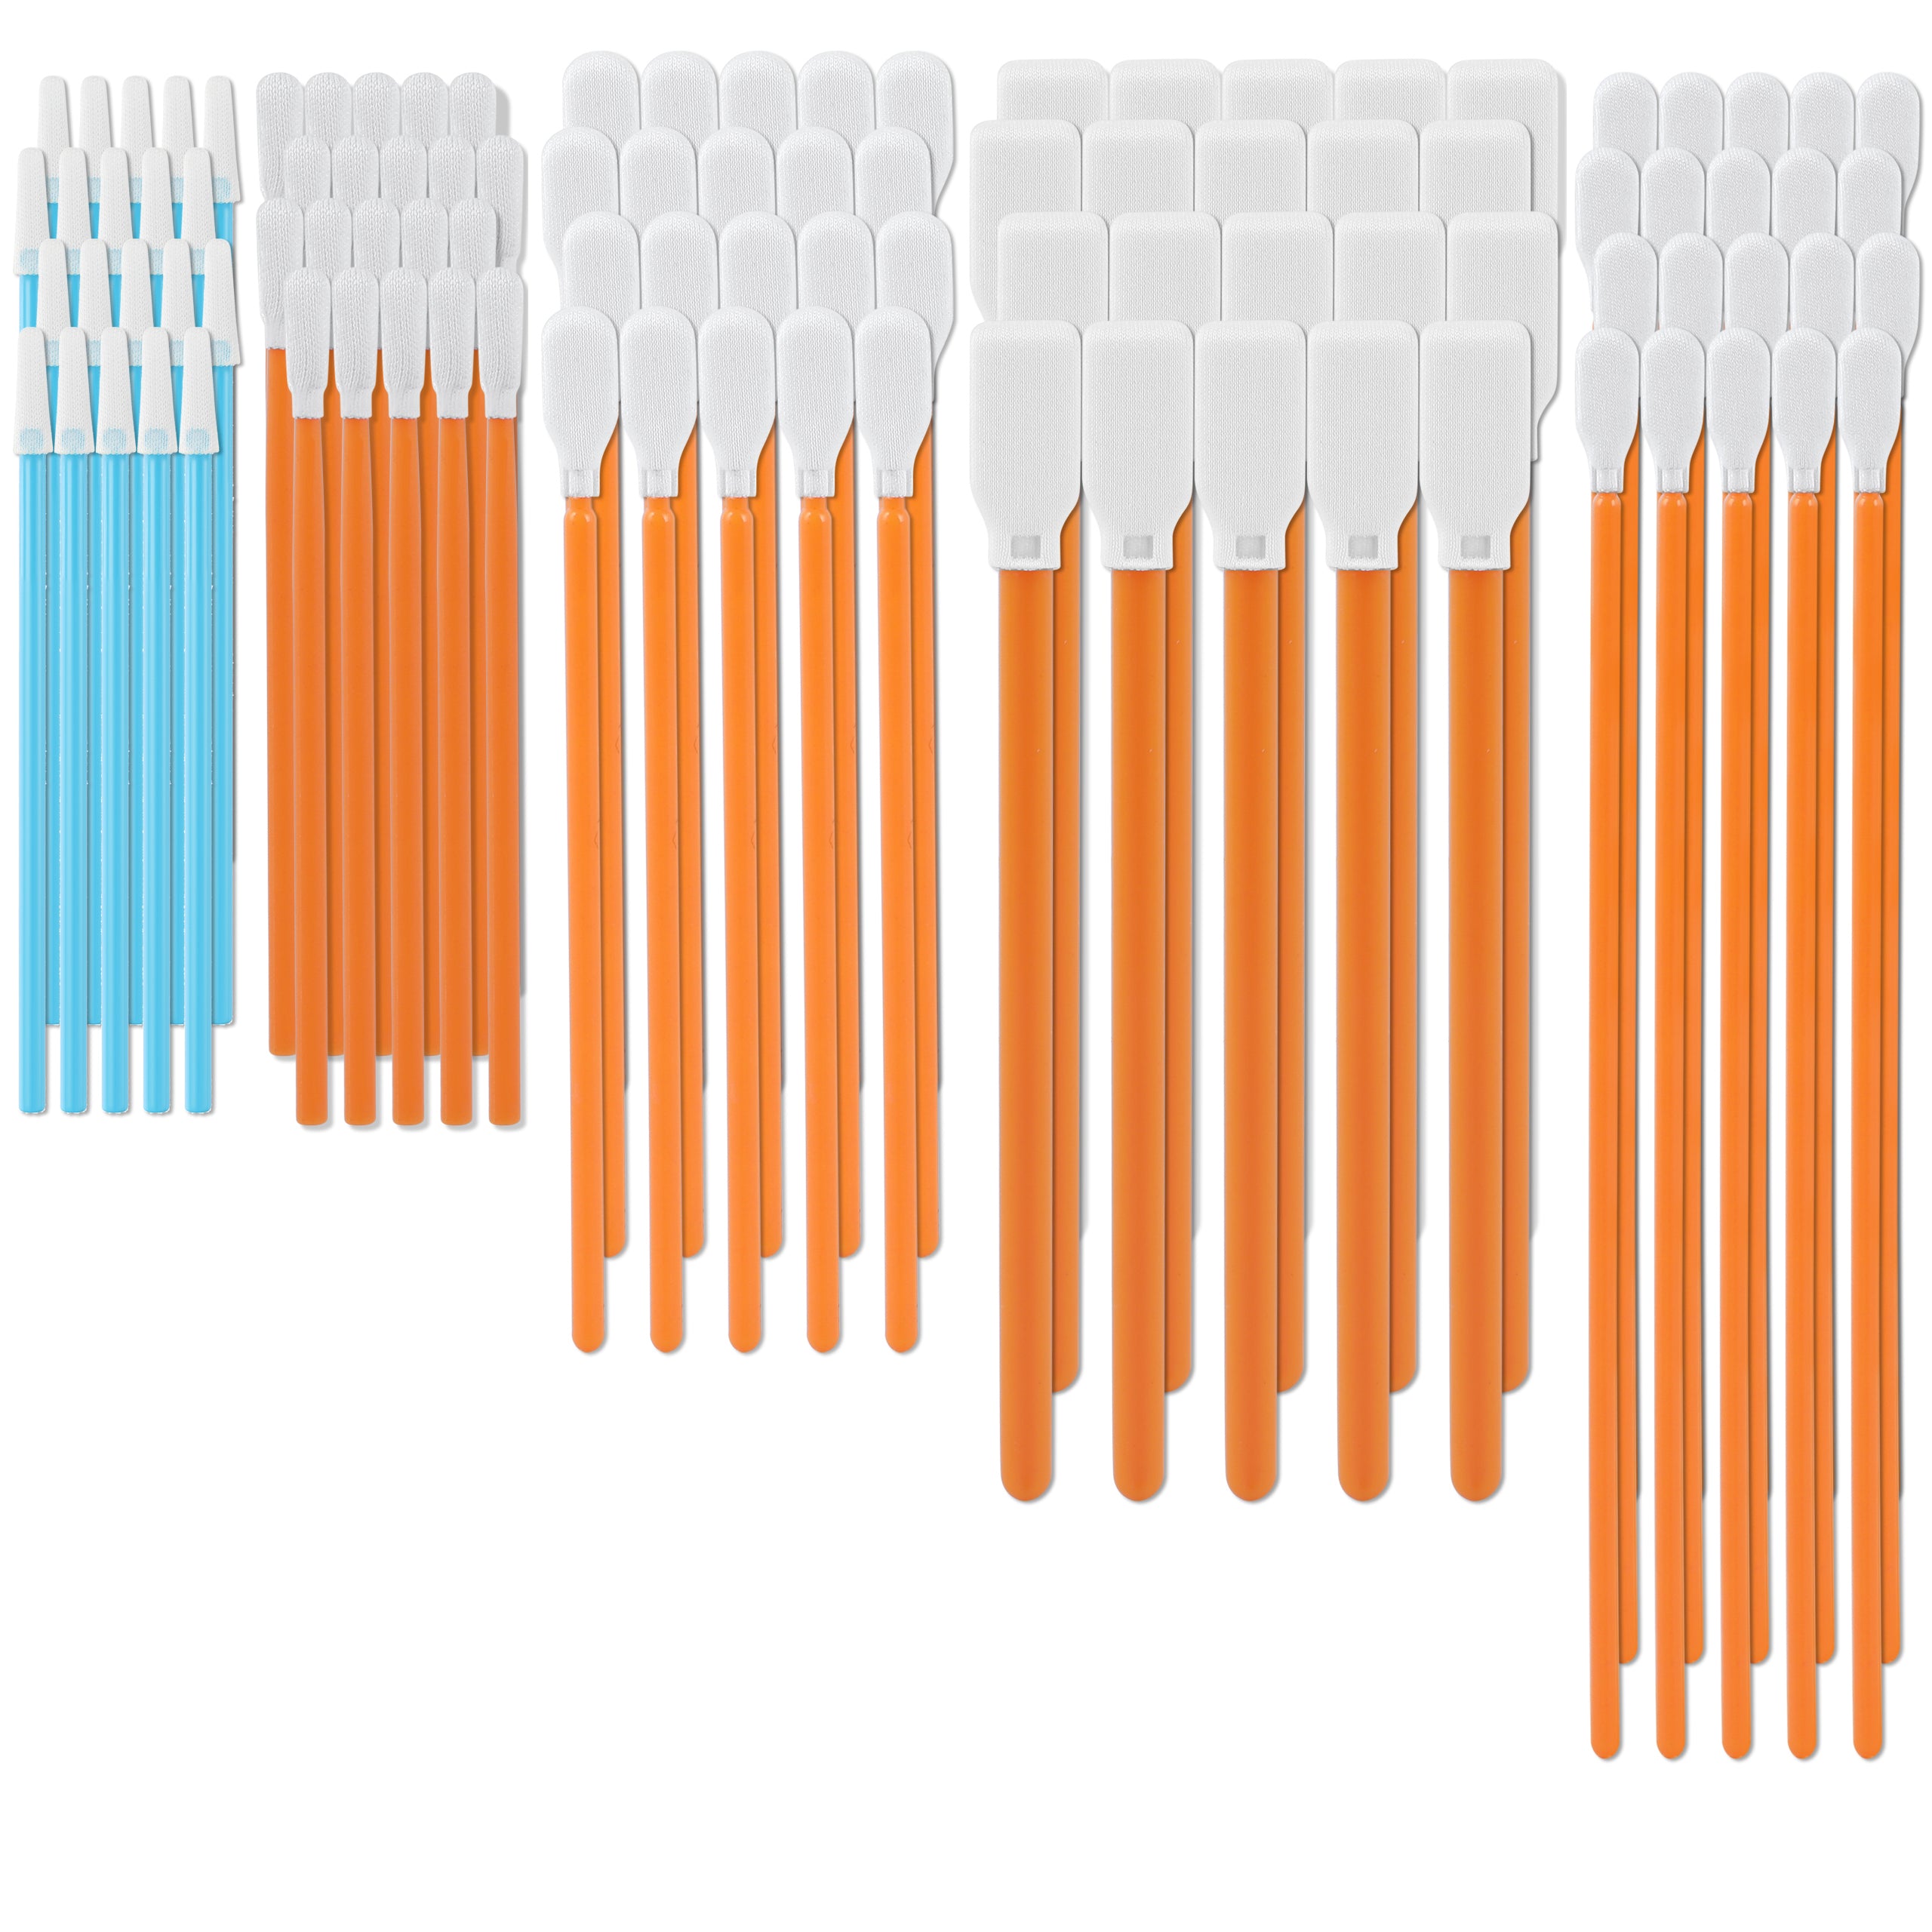 Detailing Cleaning Swab Sticks AAwipes Cleaning Swab Kit Microfiber Knitted Polyester Swab Sticks (5 Type) Lint Free Swabs for Printer, Gun, Optics Lens, Camera, Arts and Crafts, Automotive Detailing (5 Types, Total 1,000 Pcs/Pack) (No. FA501)